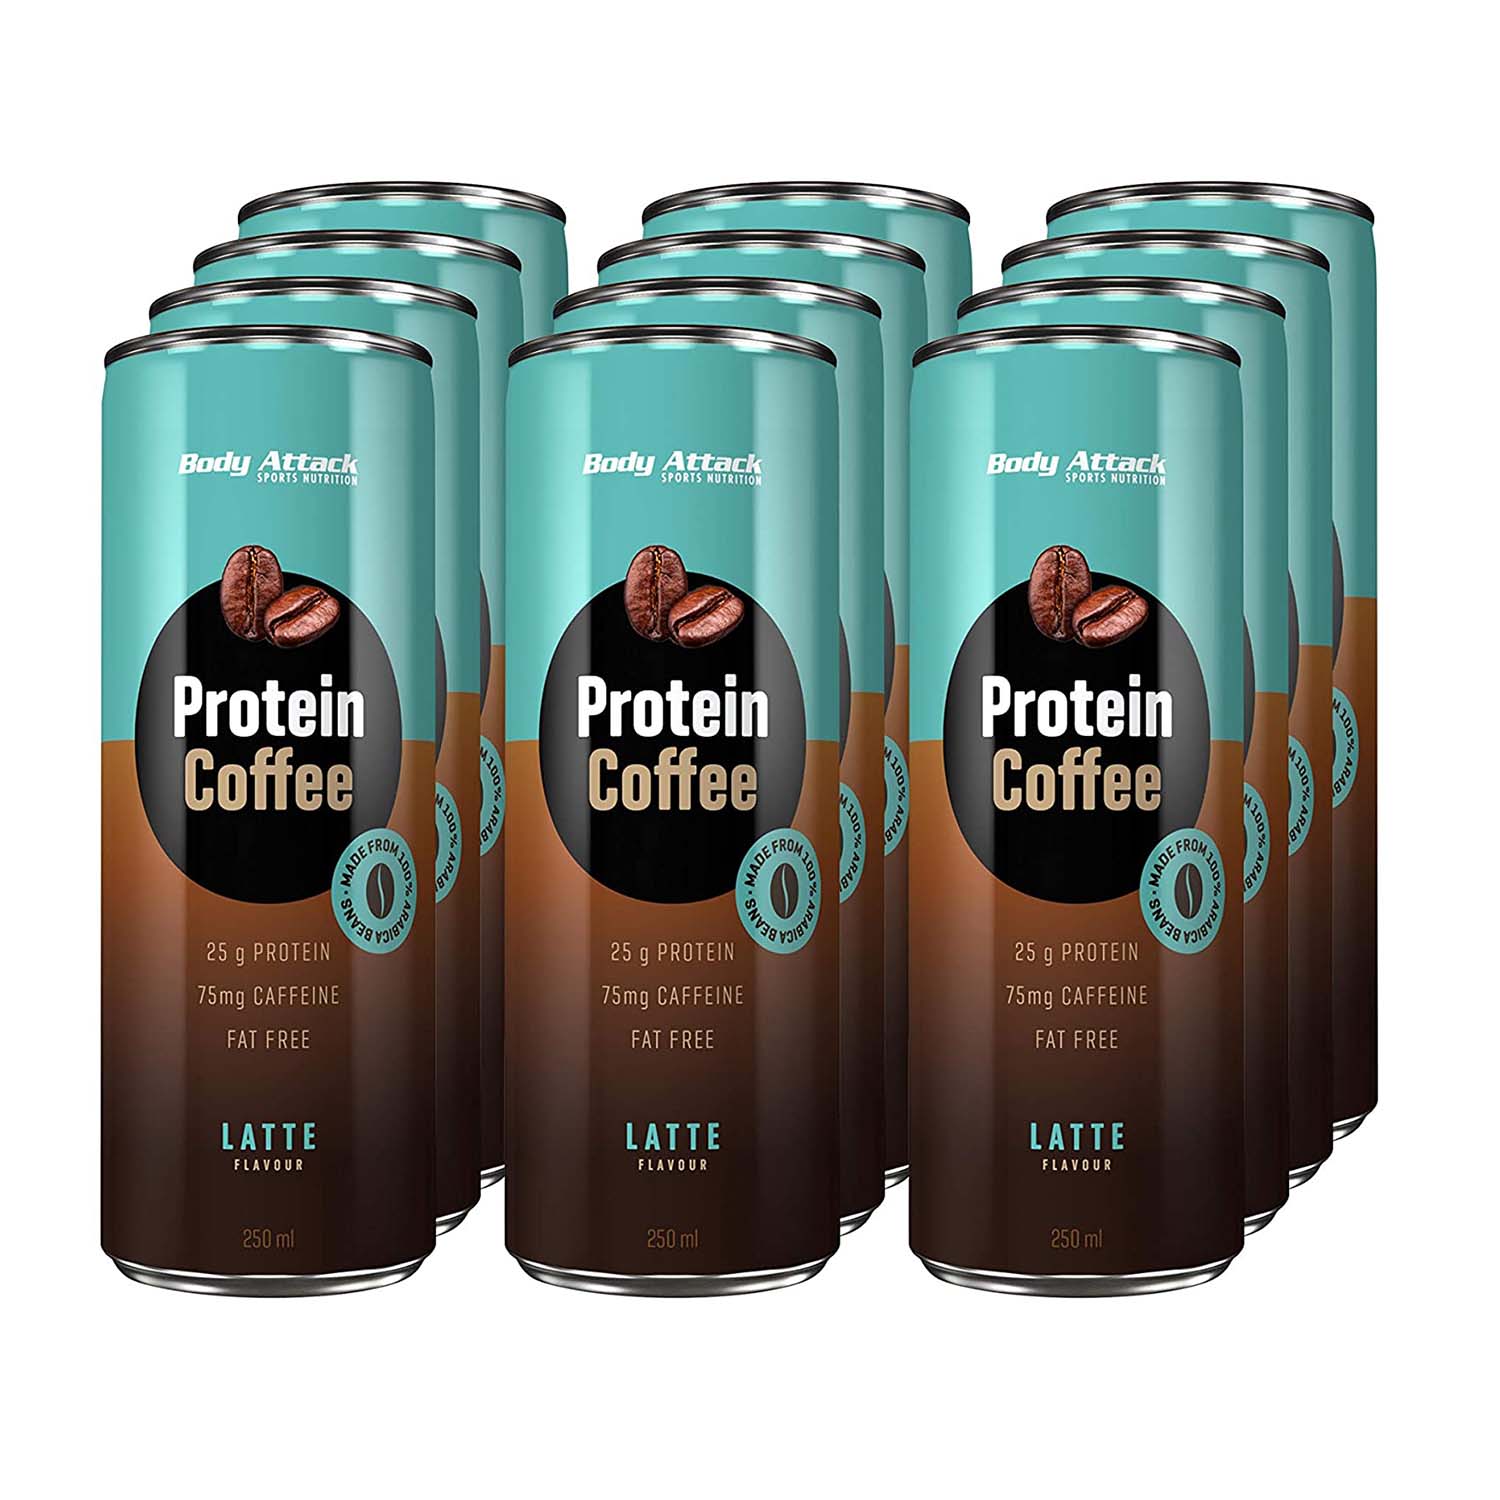 Body Attack Protein Coffee, Latte, Box of 12 Pieces